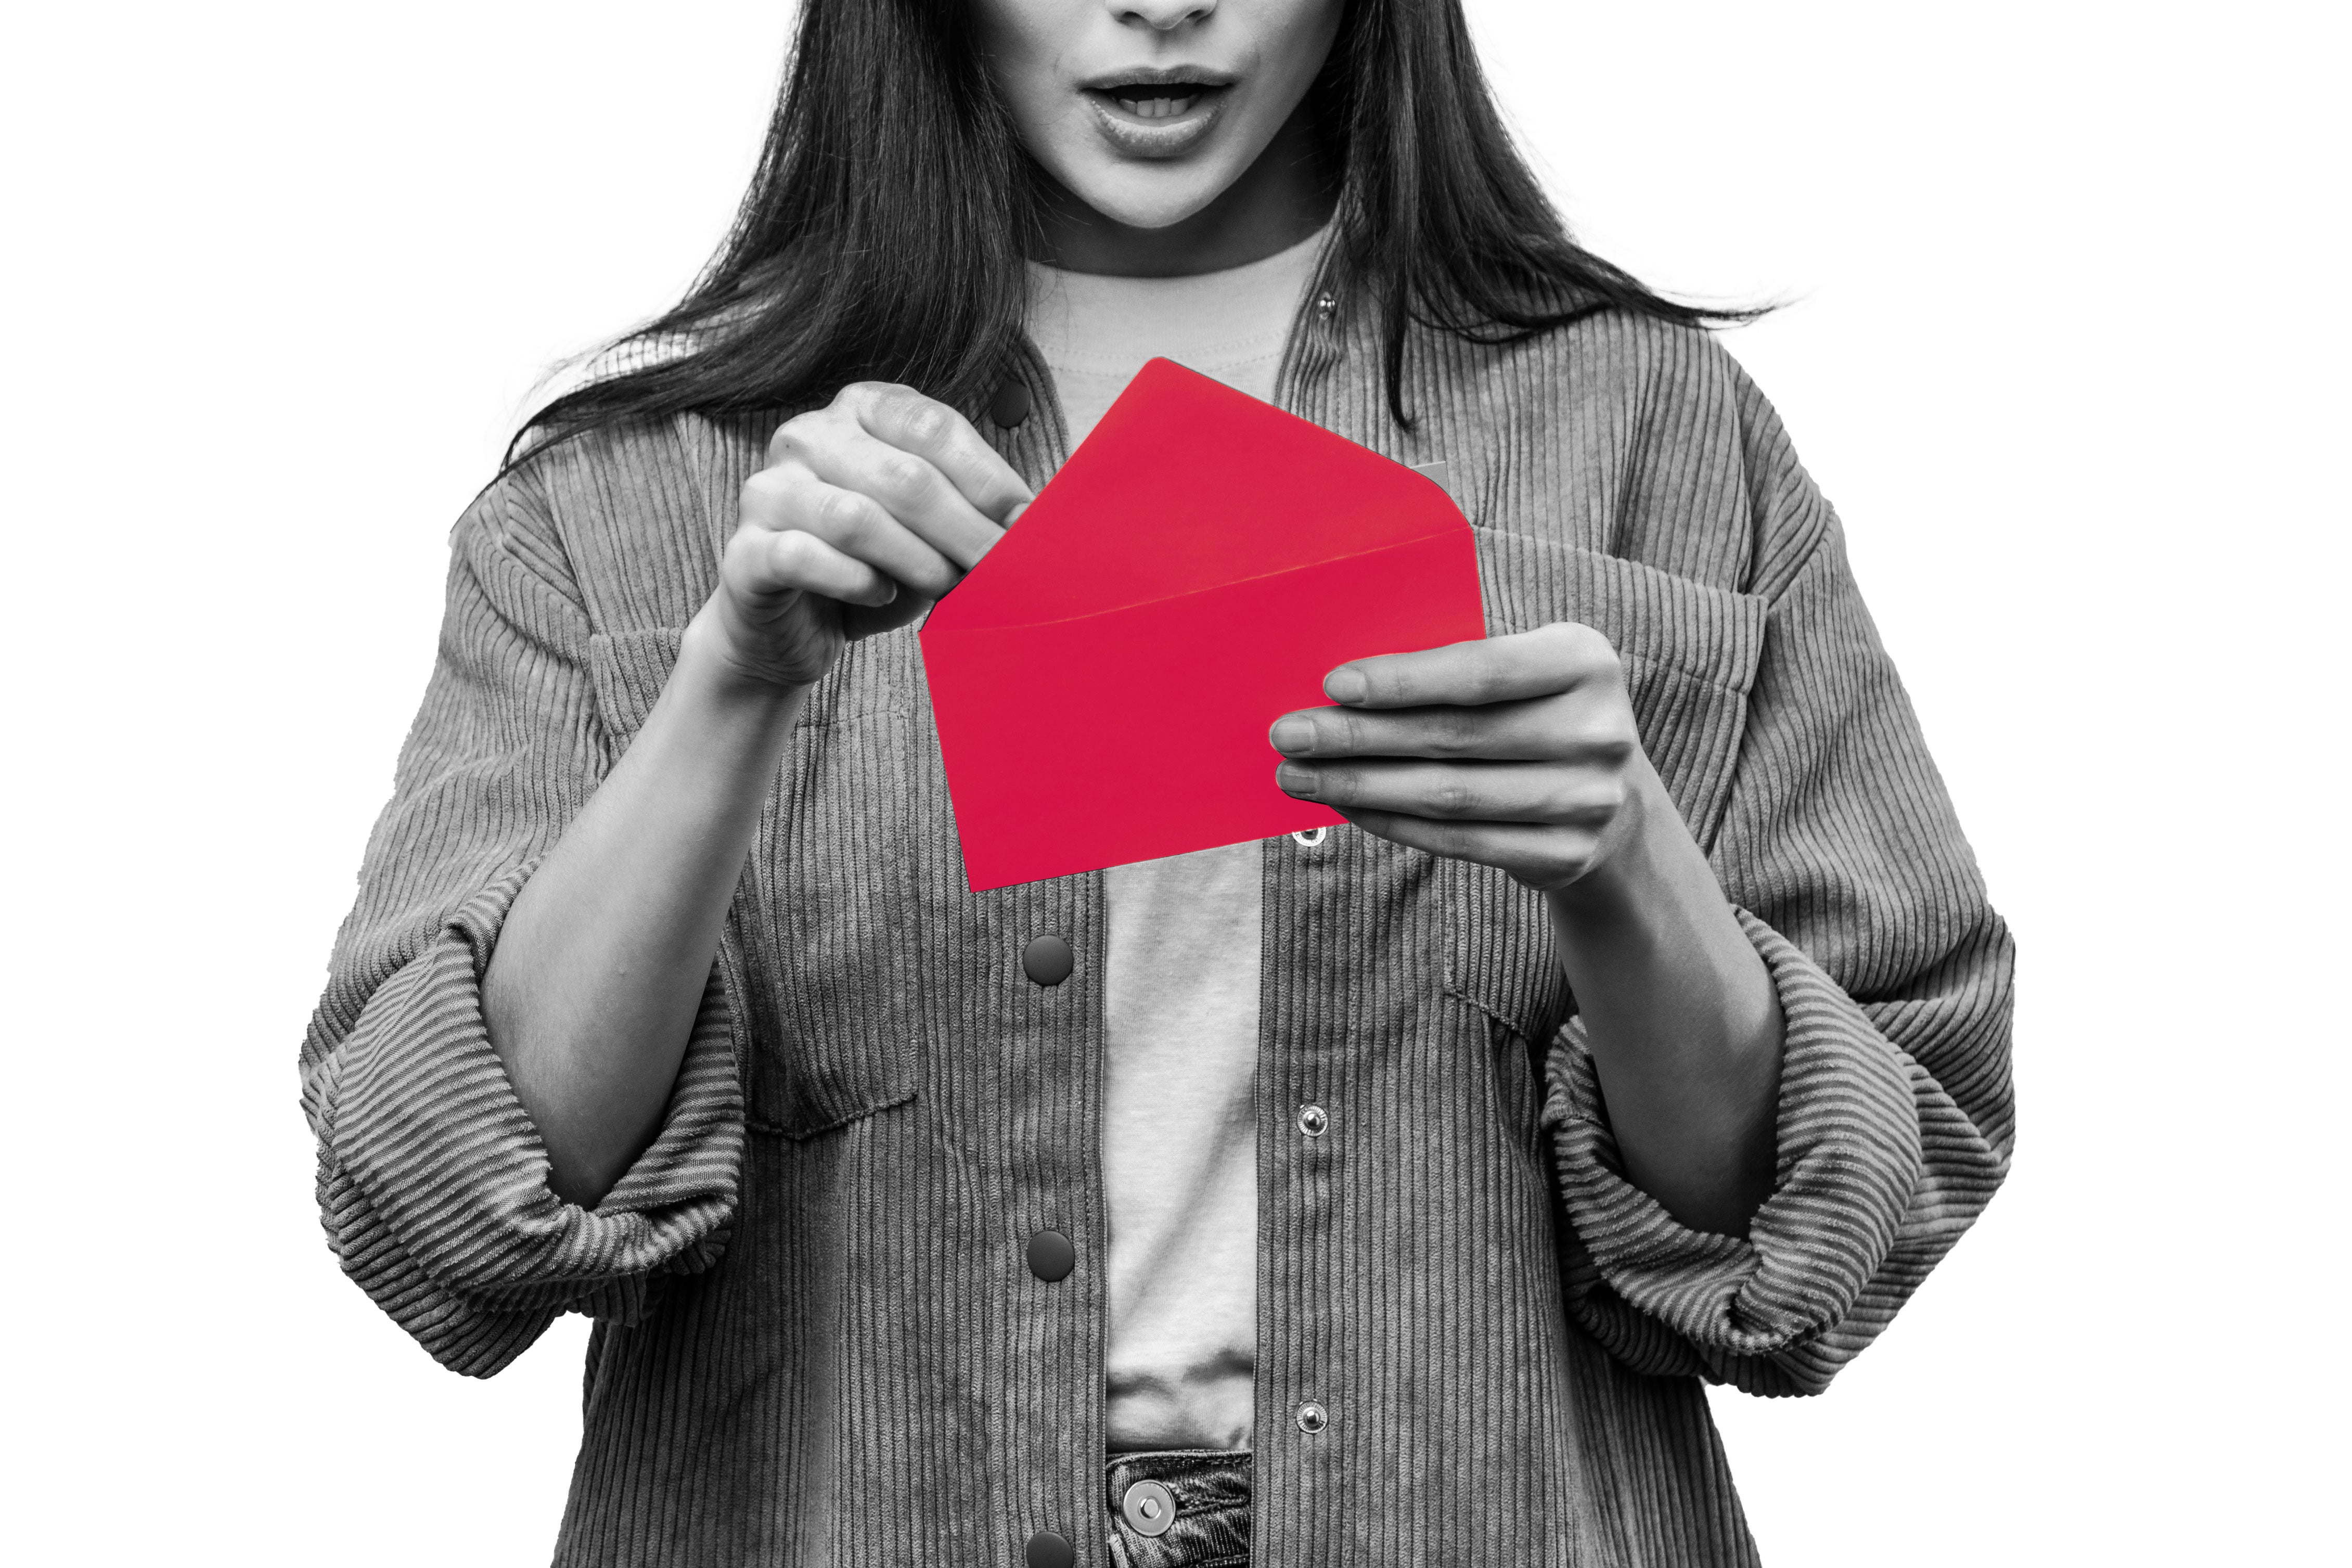 Woman looks inside of a red envelope